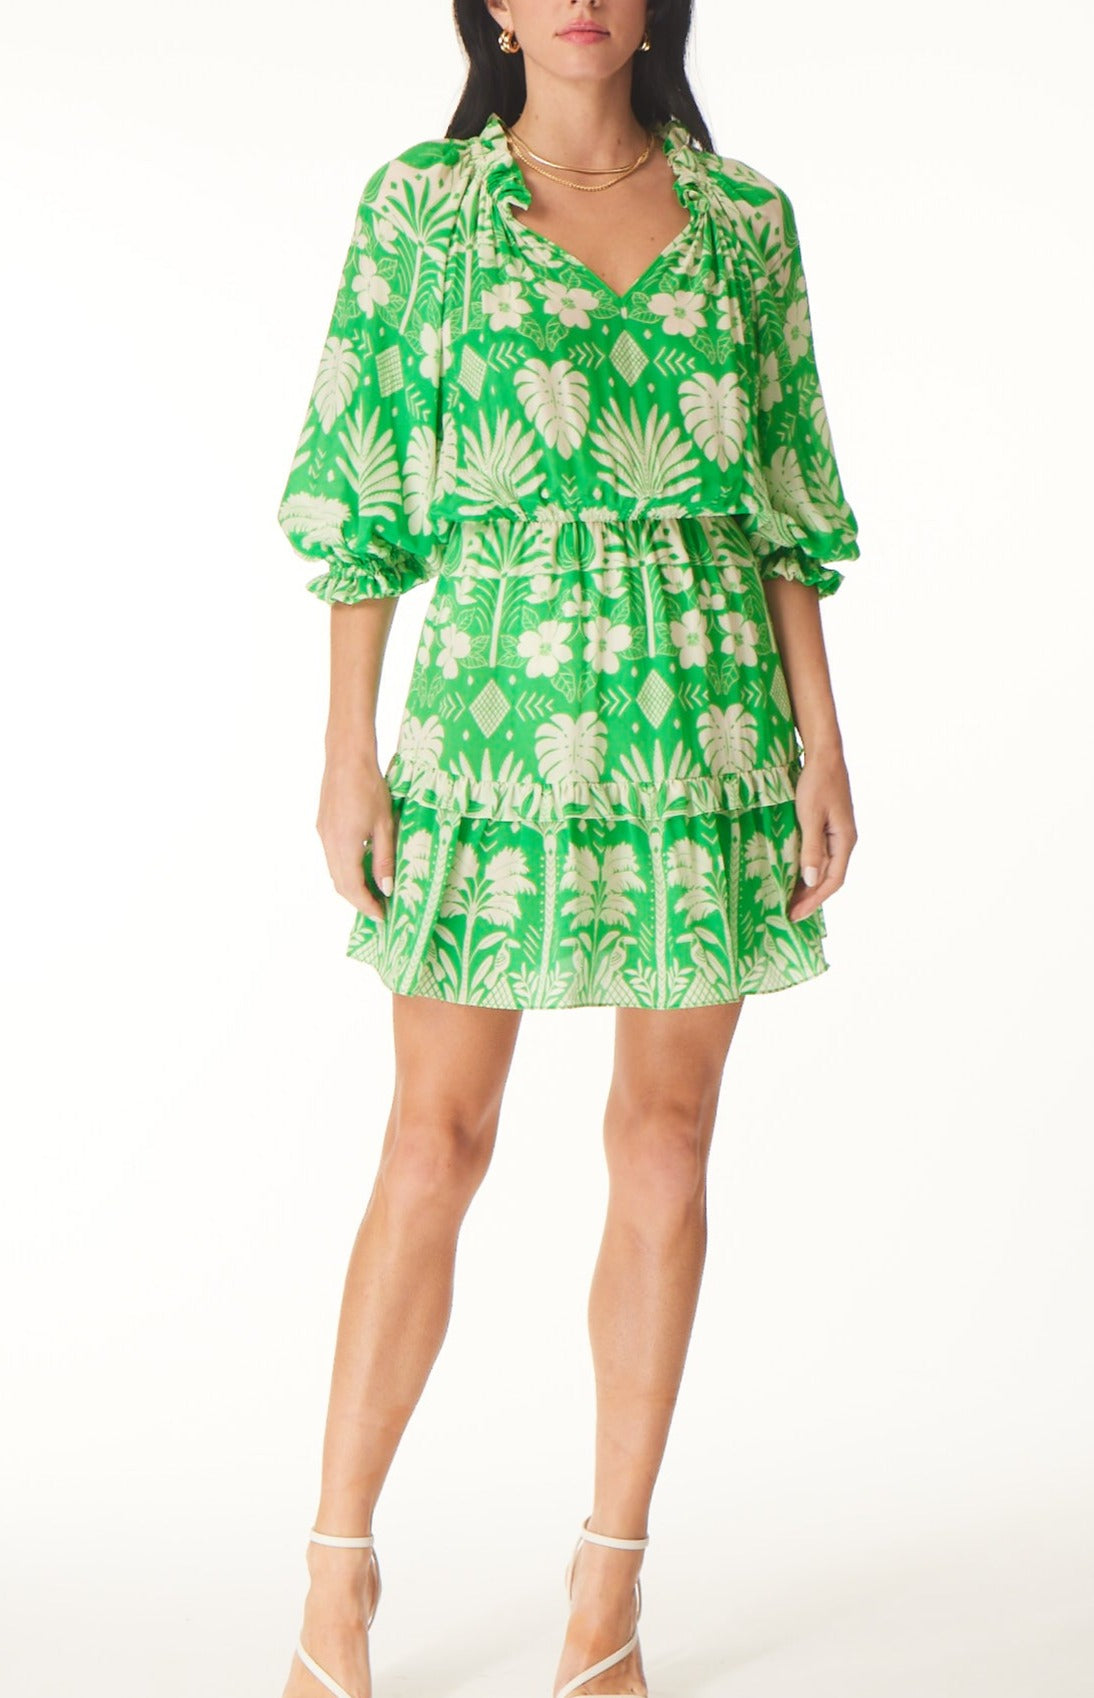 The 3/4 Sleeve Smock Mini Dress in Green Acres